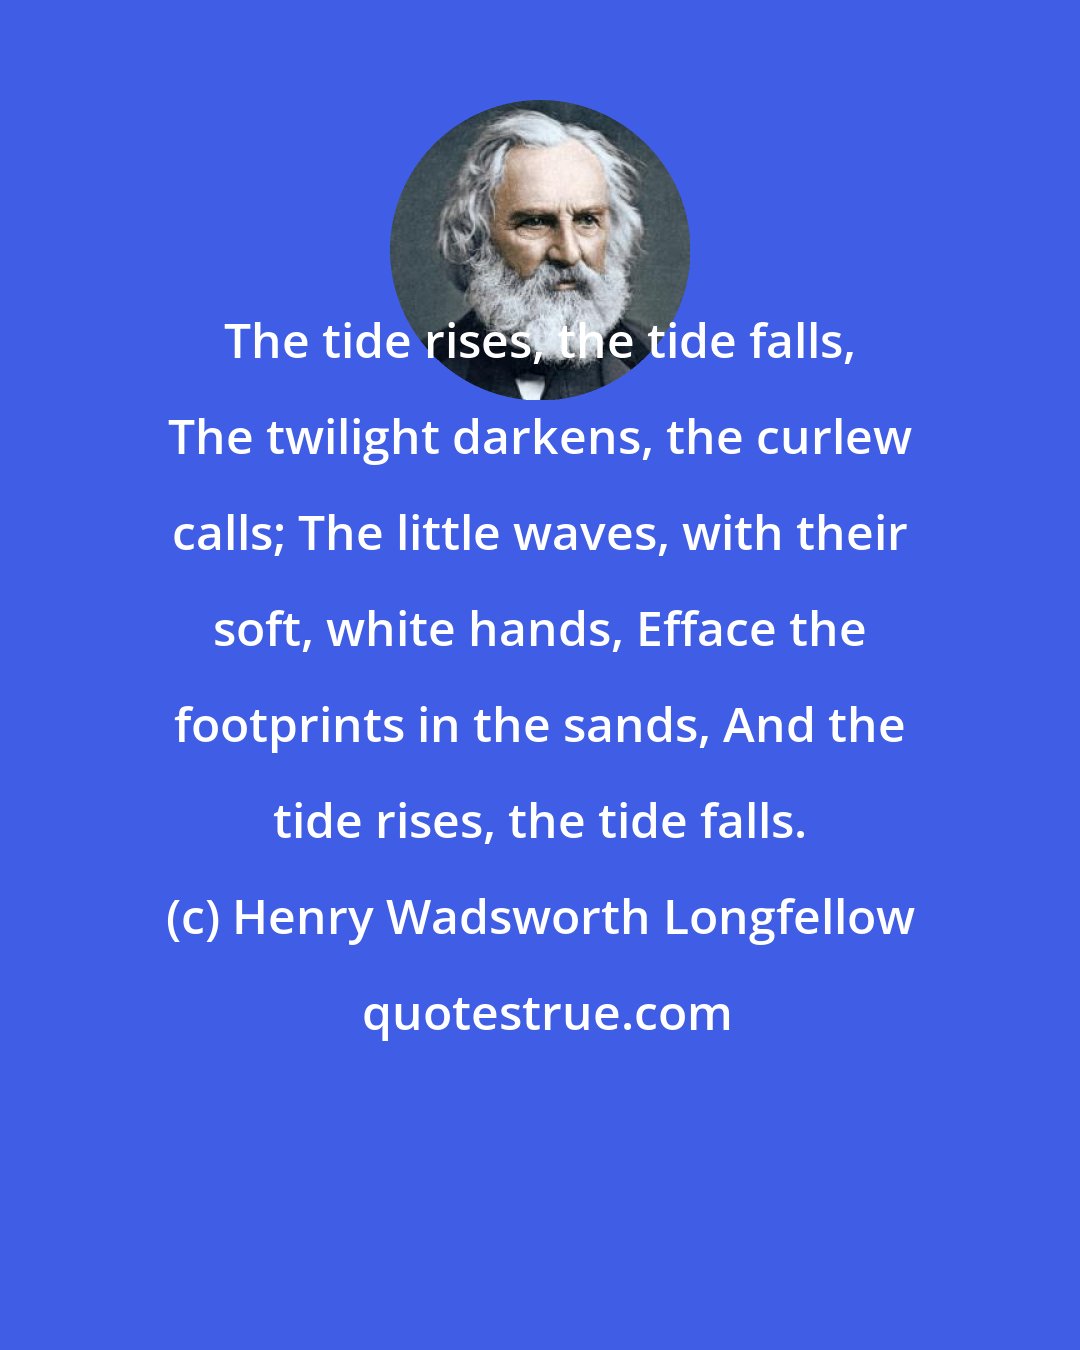 Henry Wadsworth Longfellow: The tide rises, the tide falls, The twilight darkens, the curlew calls; The little waves, with their soft, white hands, Efface the footprints in the sands, And the tide rises, the tide falls.